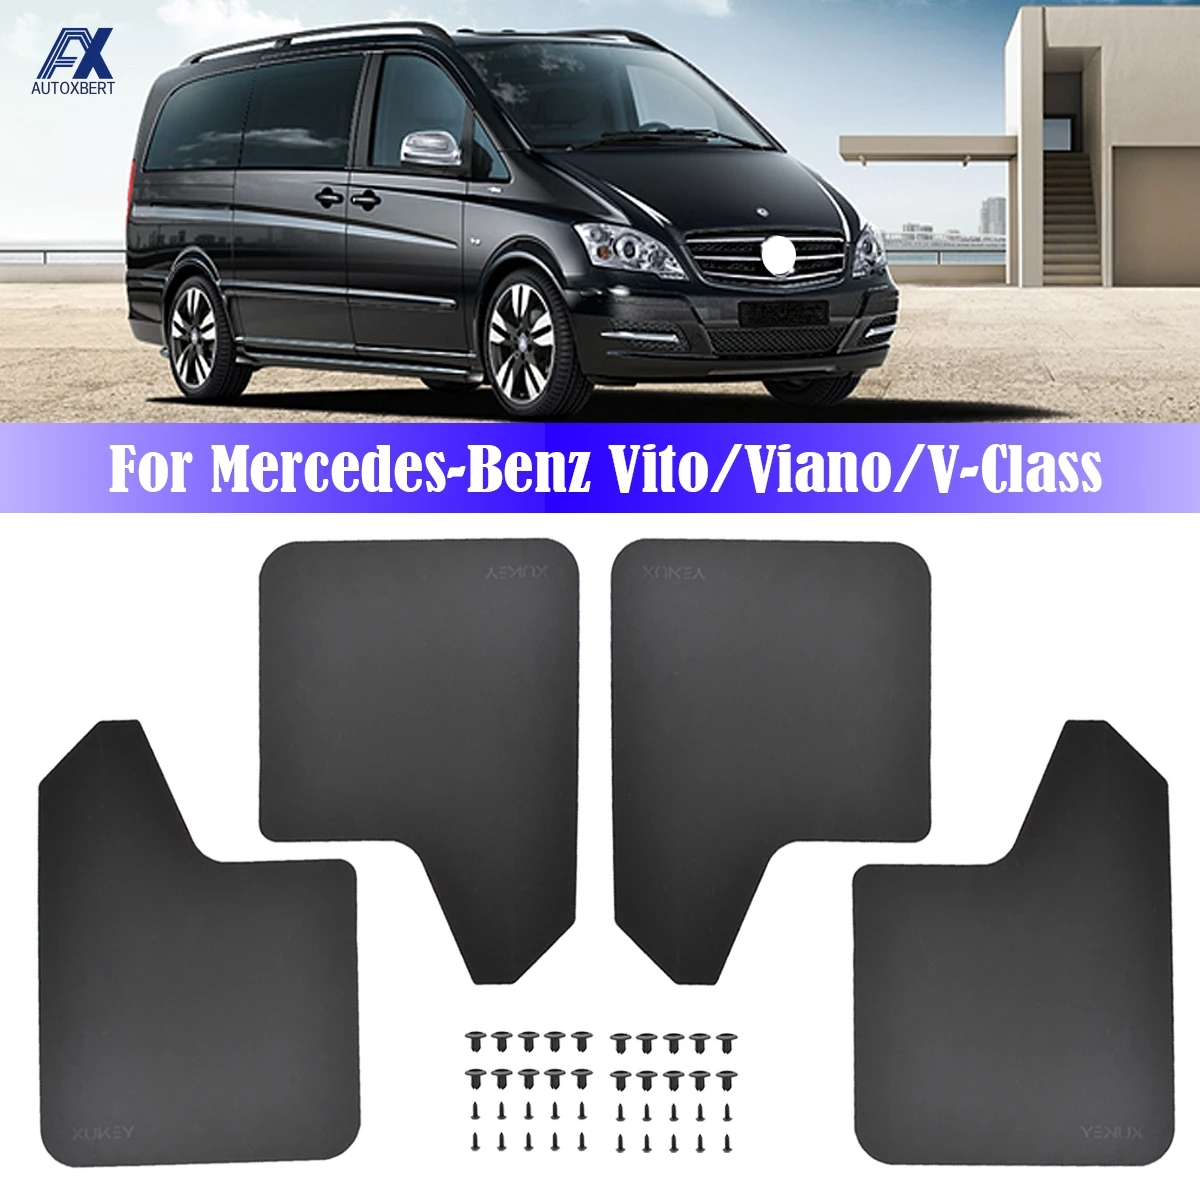 OEM Splash Guards Mud Guards Flaps For 2009-2011 Mercedes Benz Vito Viano W639